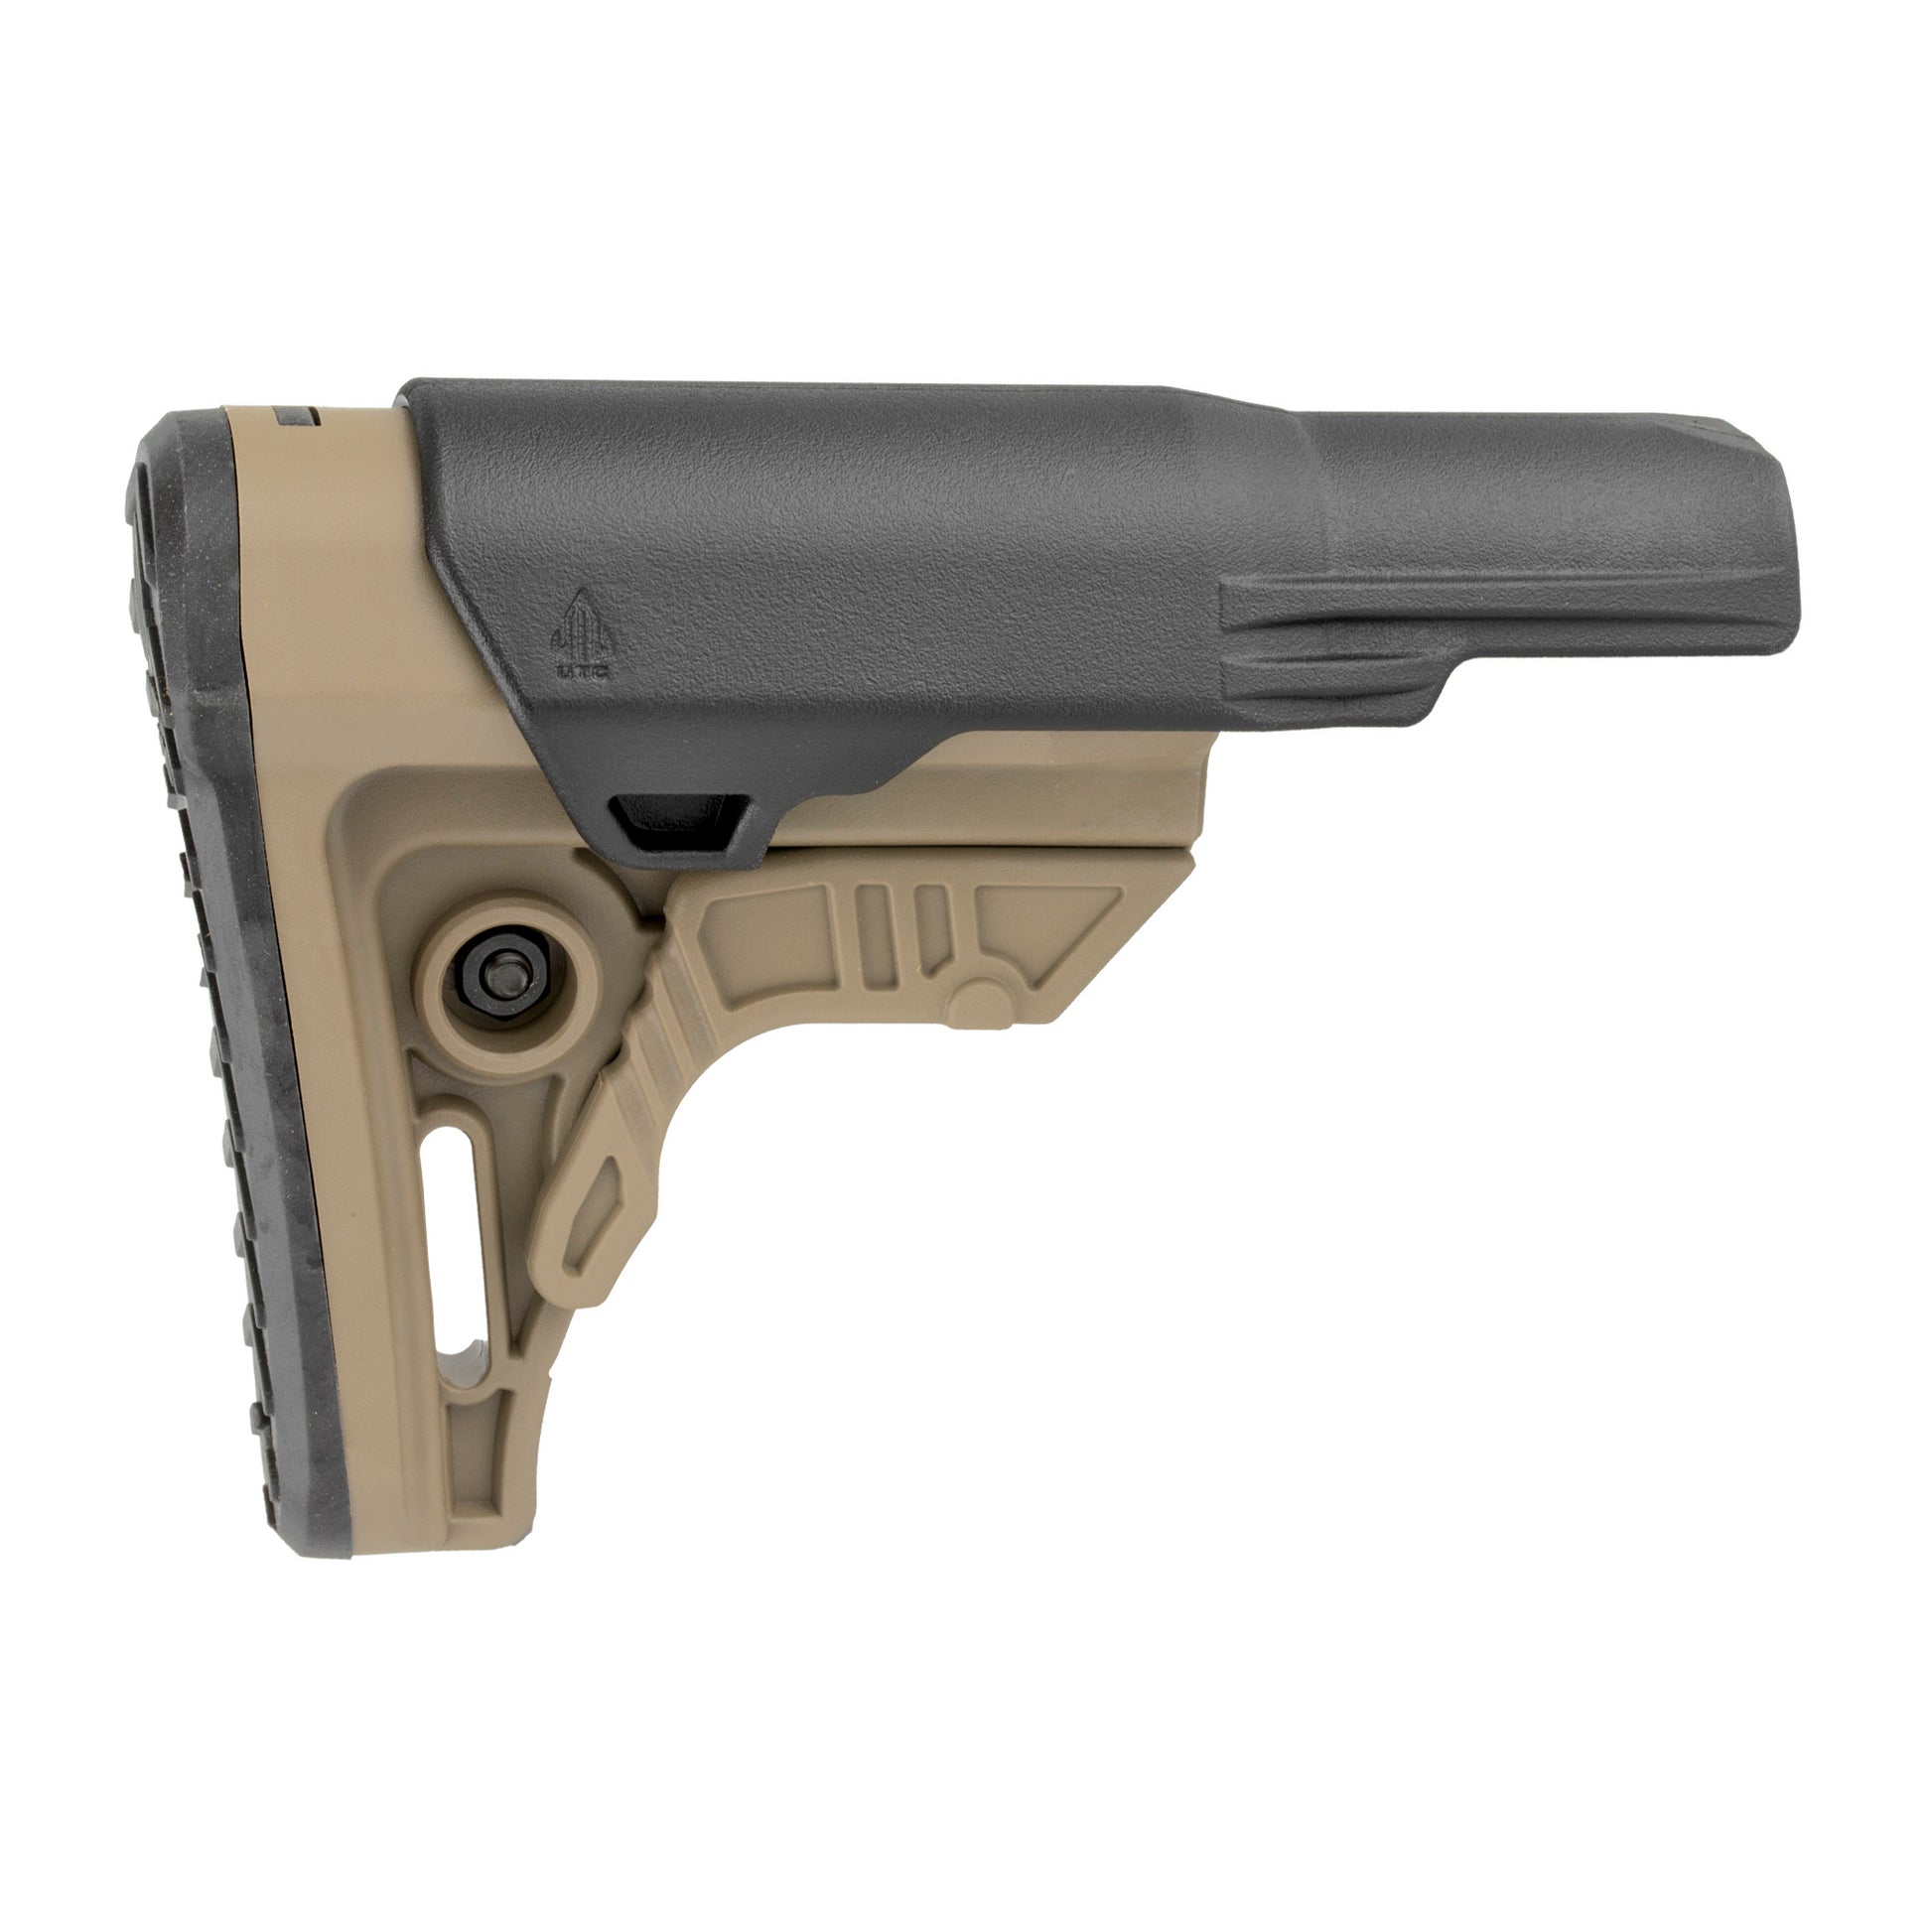 Leapers Inc UTG PRO Mil-spec Stock FDE Fits AR-15 Compact Size RBUS4DMS - California Shooting Supplies